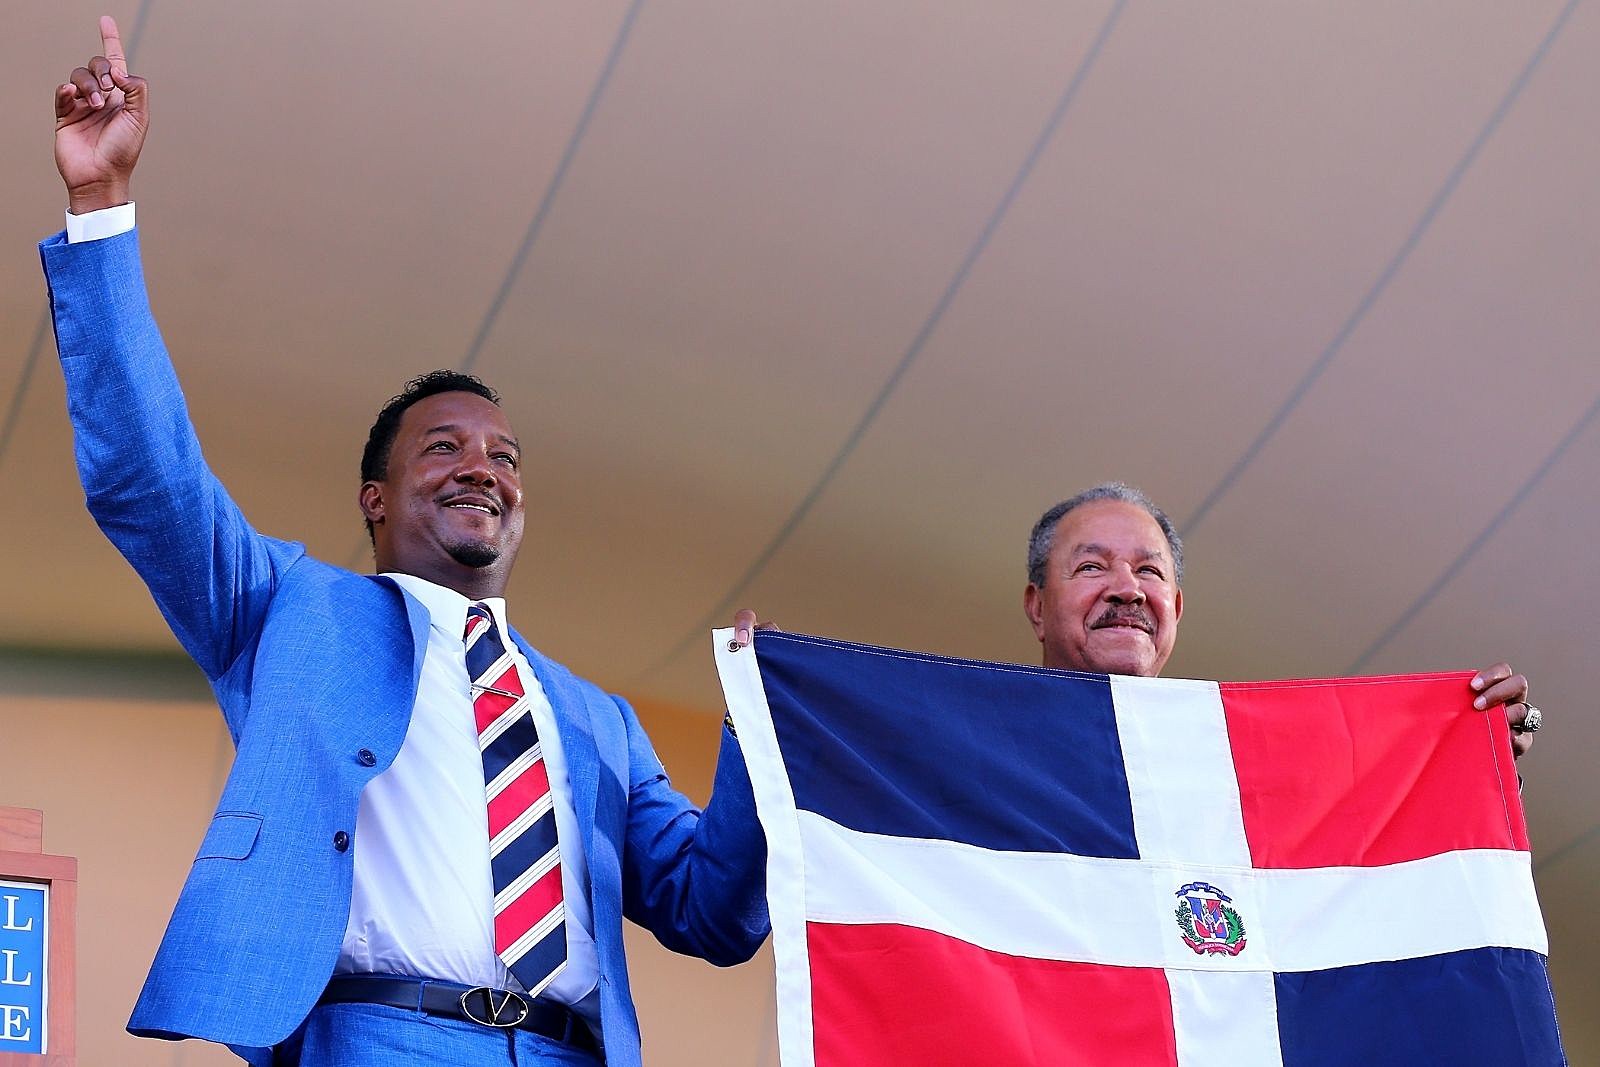 Party Like a Hall of Famer With Pedro Martinez and Jason Varitek